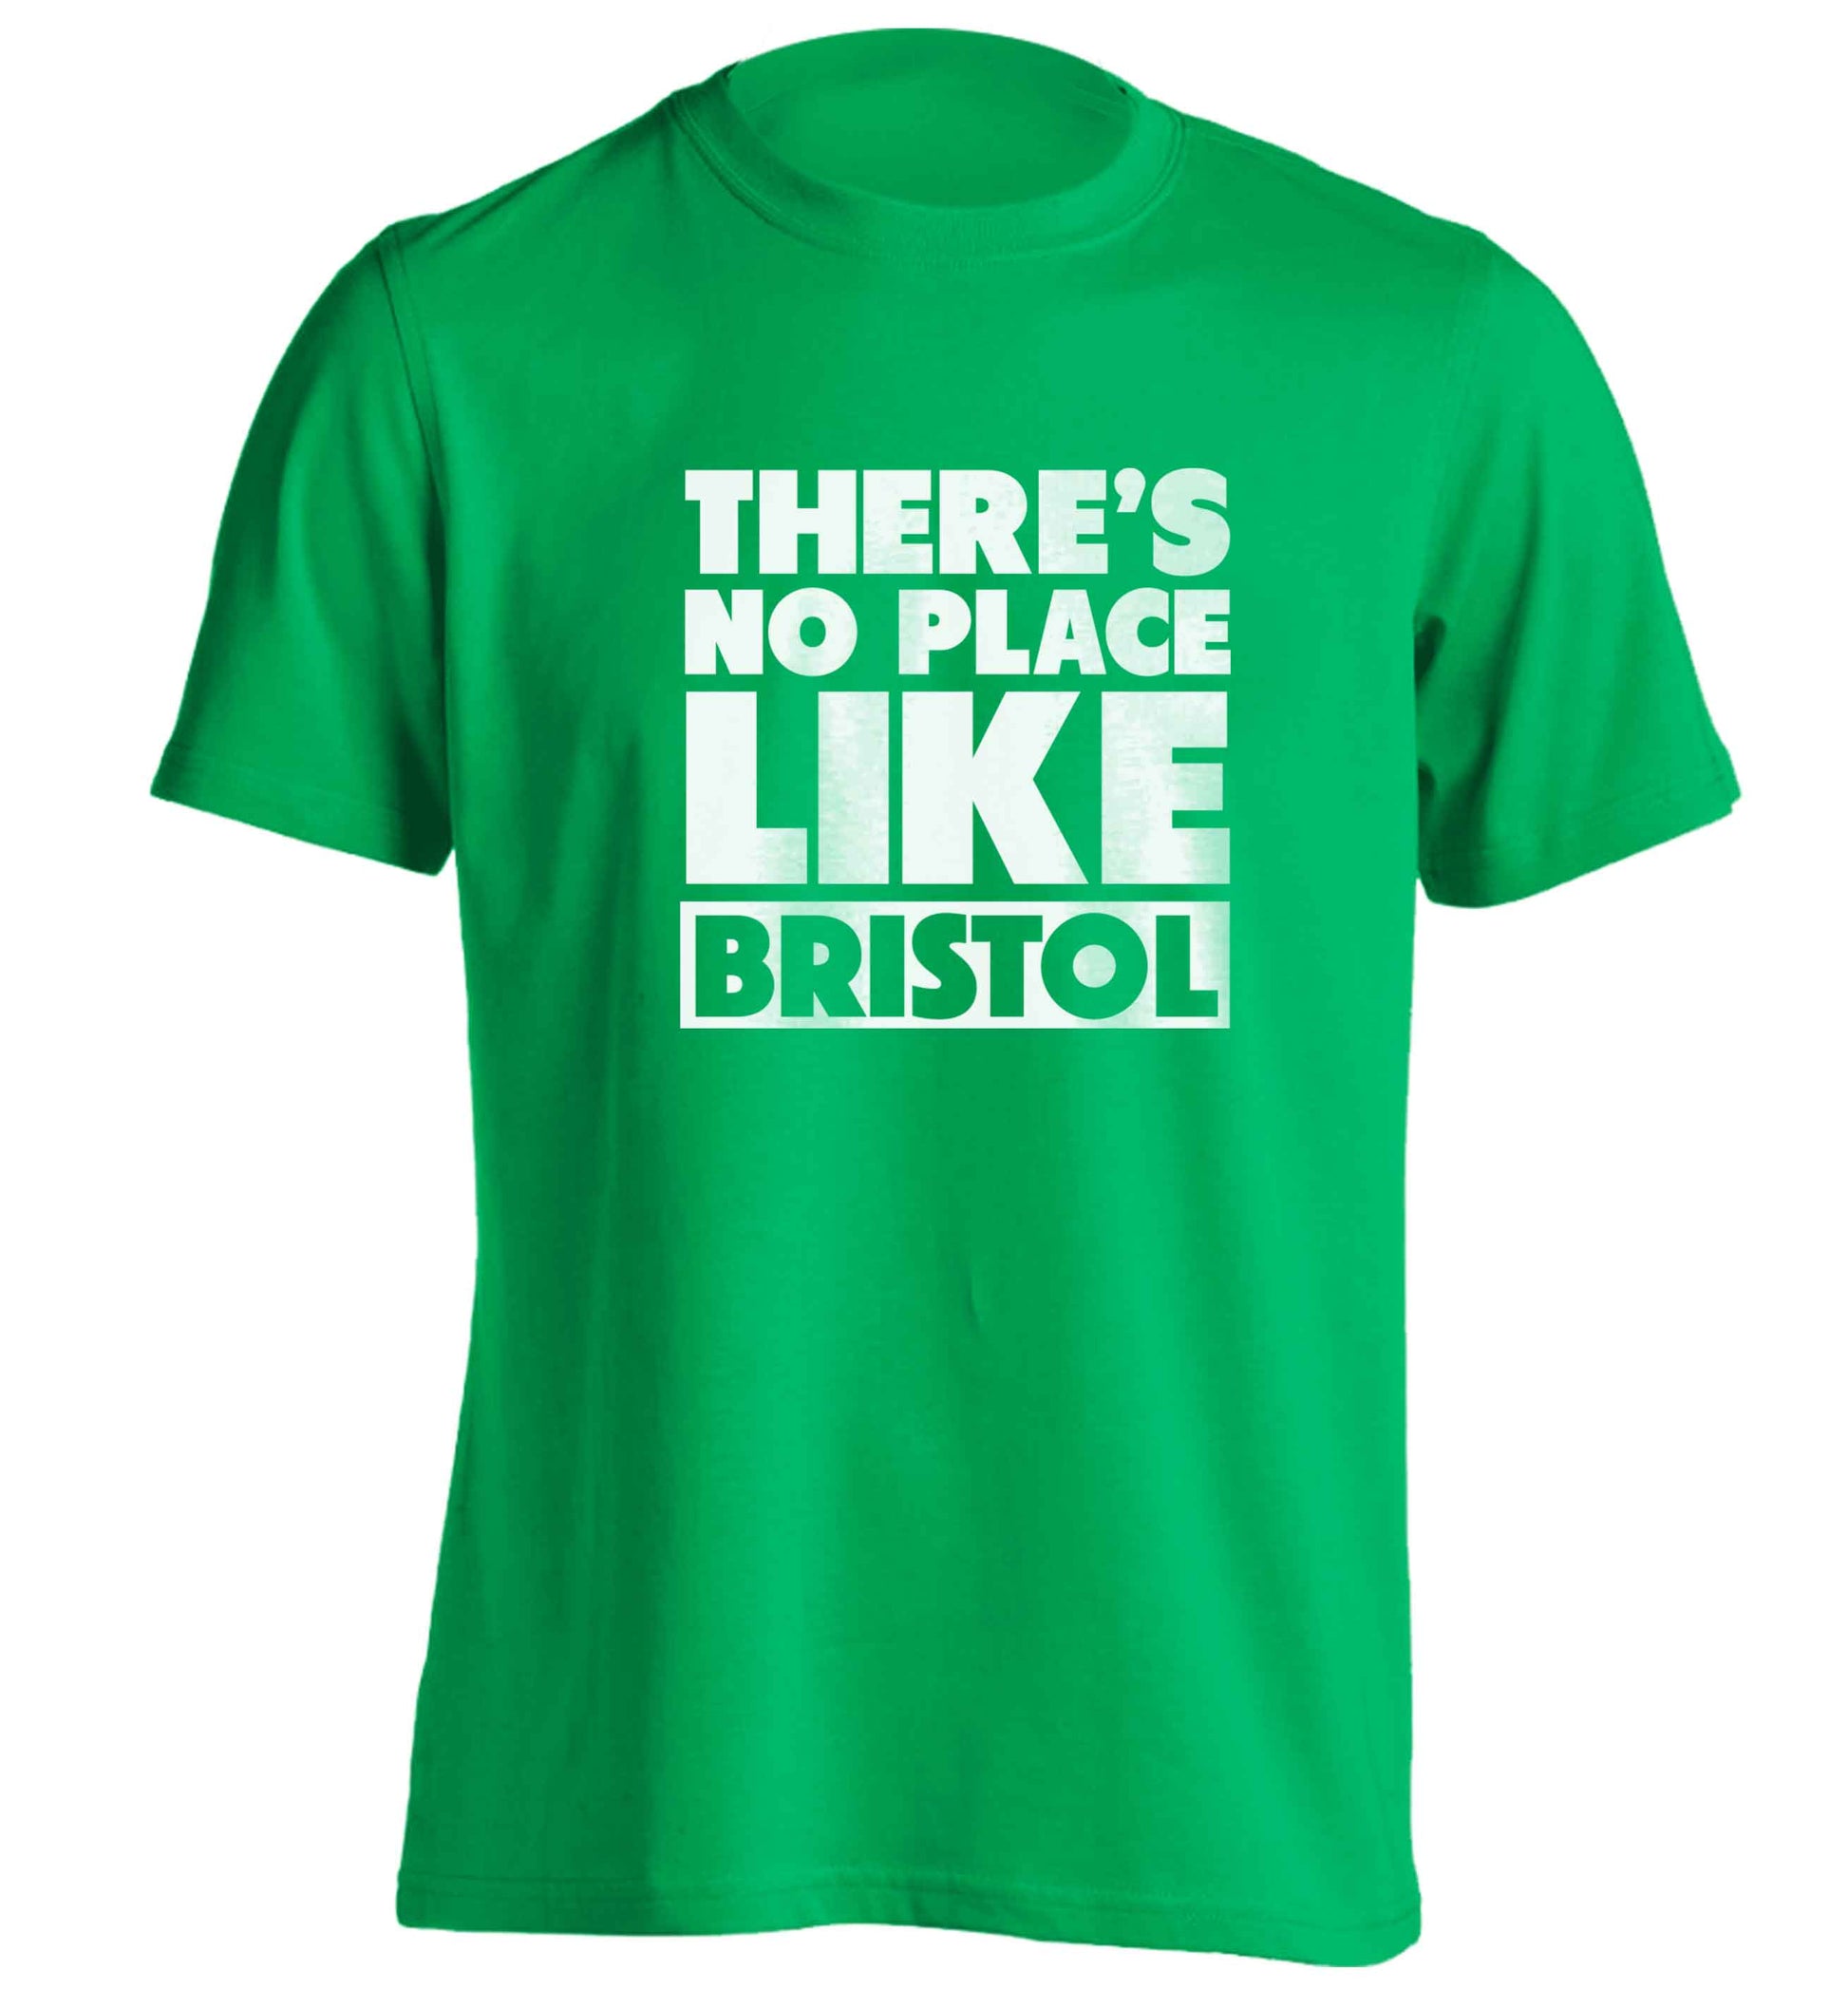 There's no place like Bristol adults unisex green Tshirt 2XL